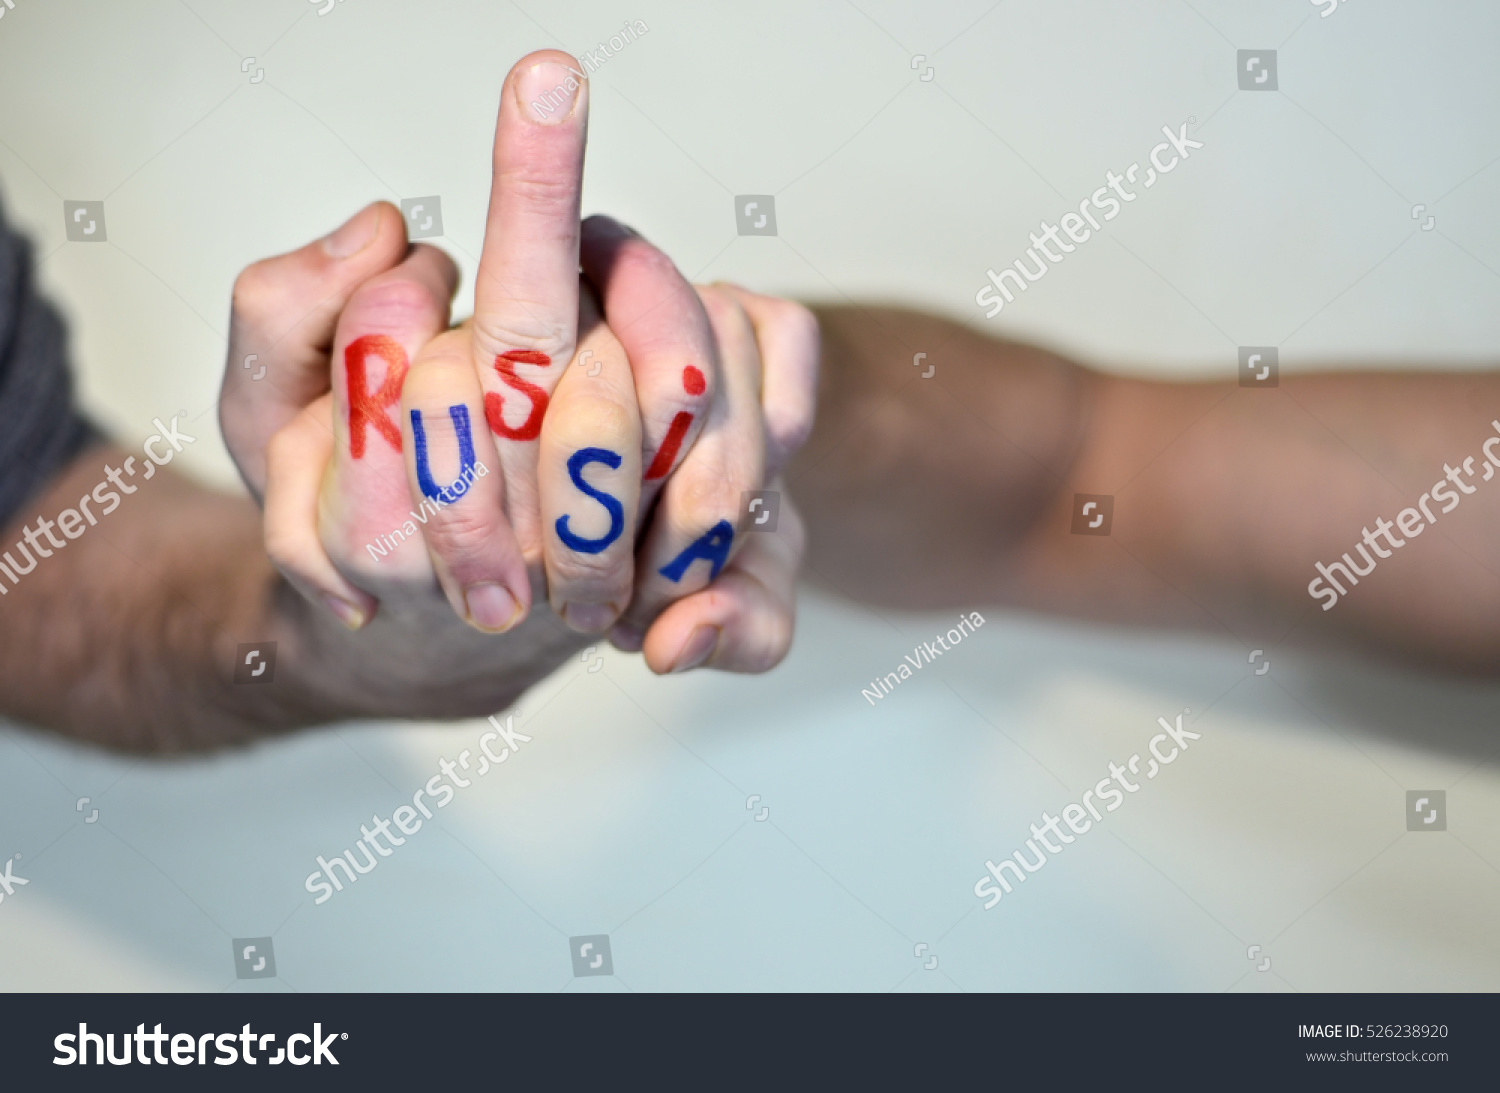 stock-photo-close-up-two-hands-locked-in-fight-on-the-one-of-the-hand-written-russia-on-another-usa-526238920.jpg